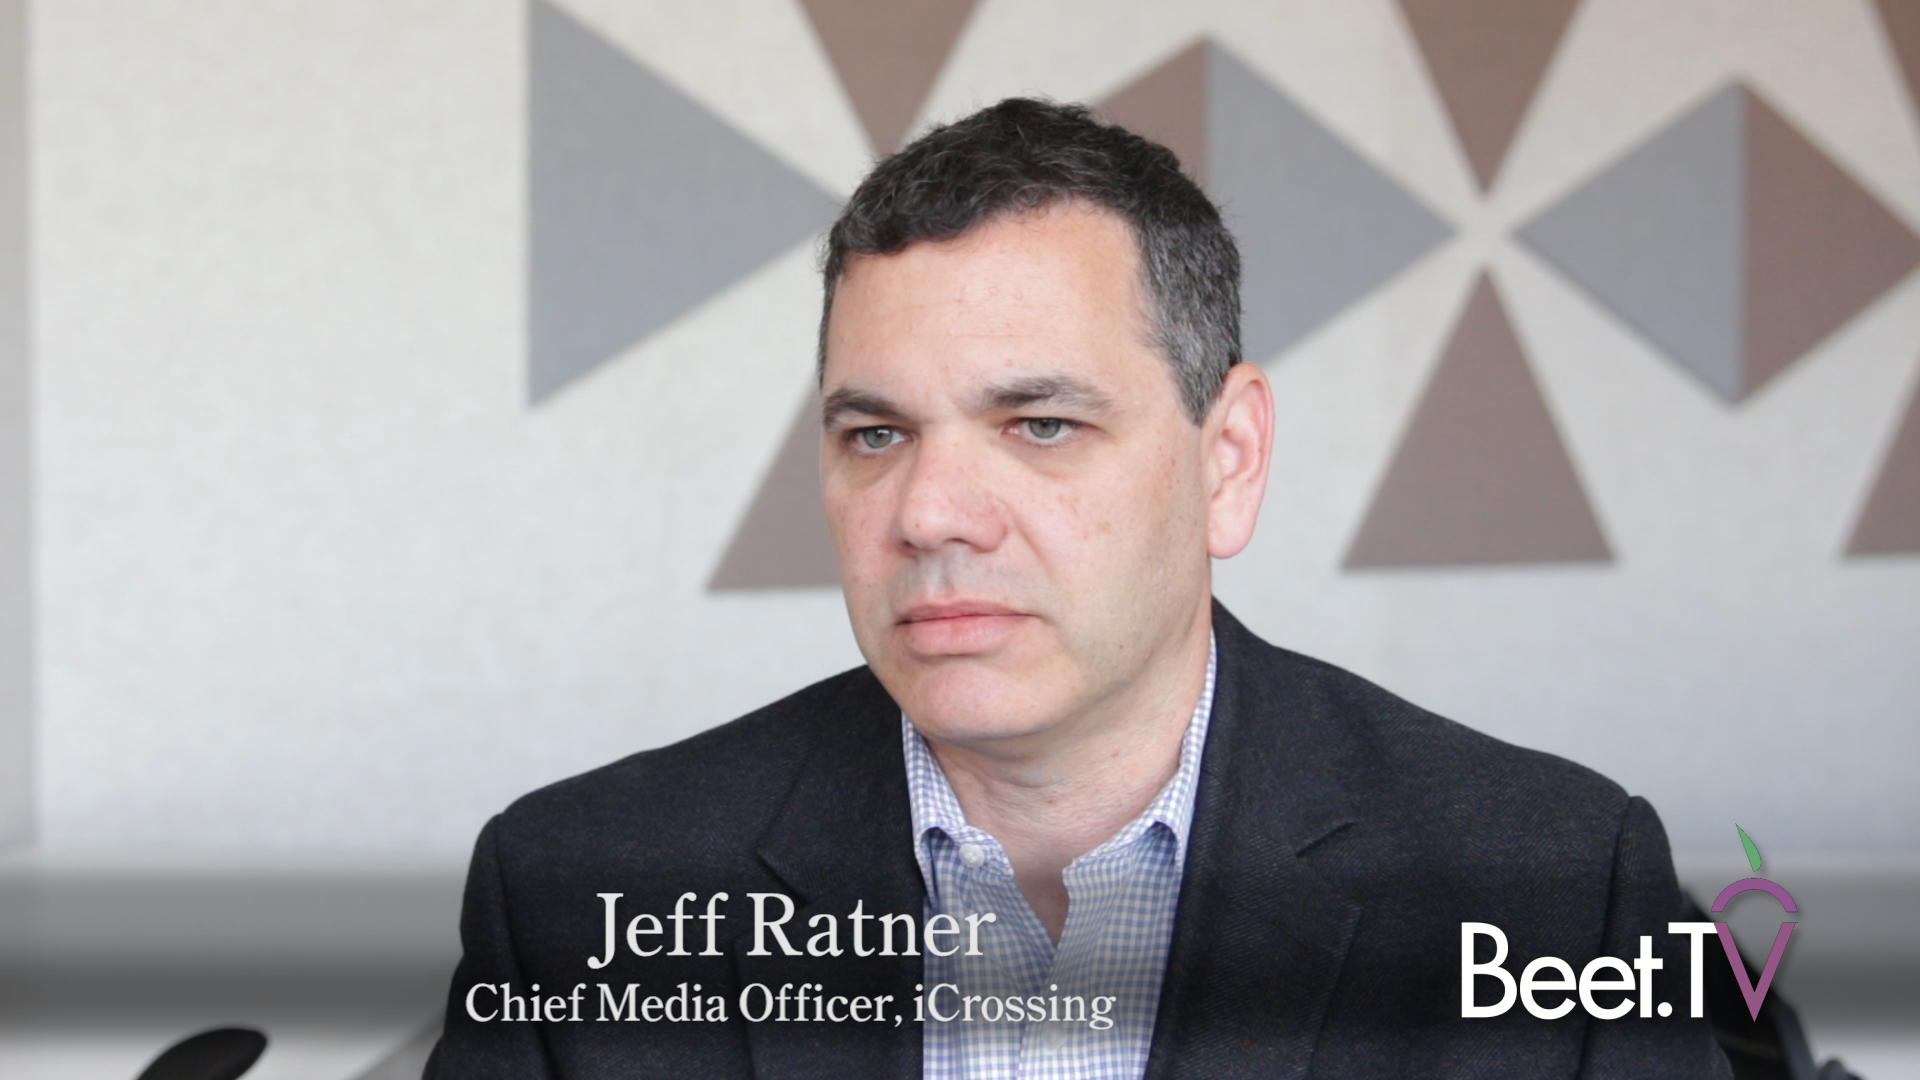 iCrossing’s Ratner Ponders YouTube’s Stratification, ‘Tunneling Effect’